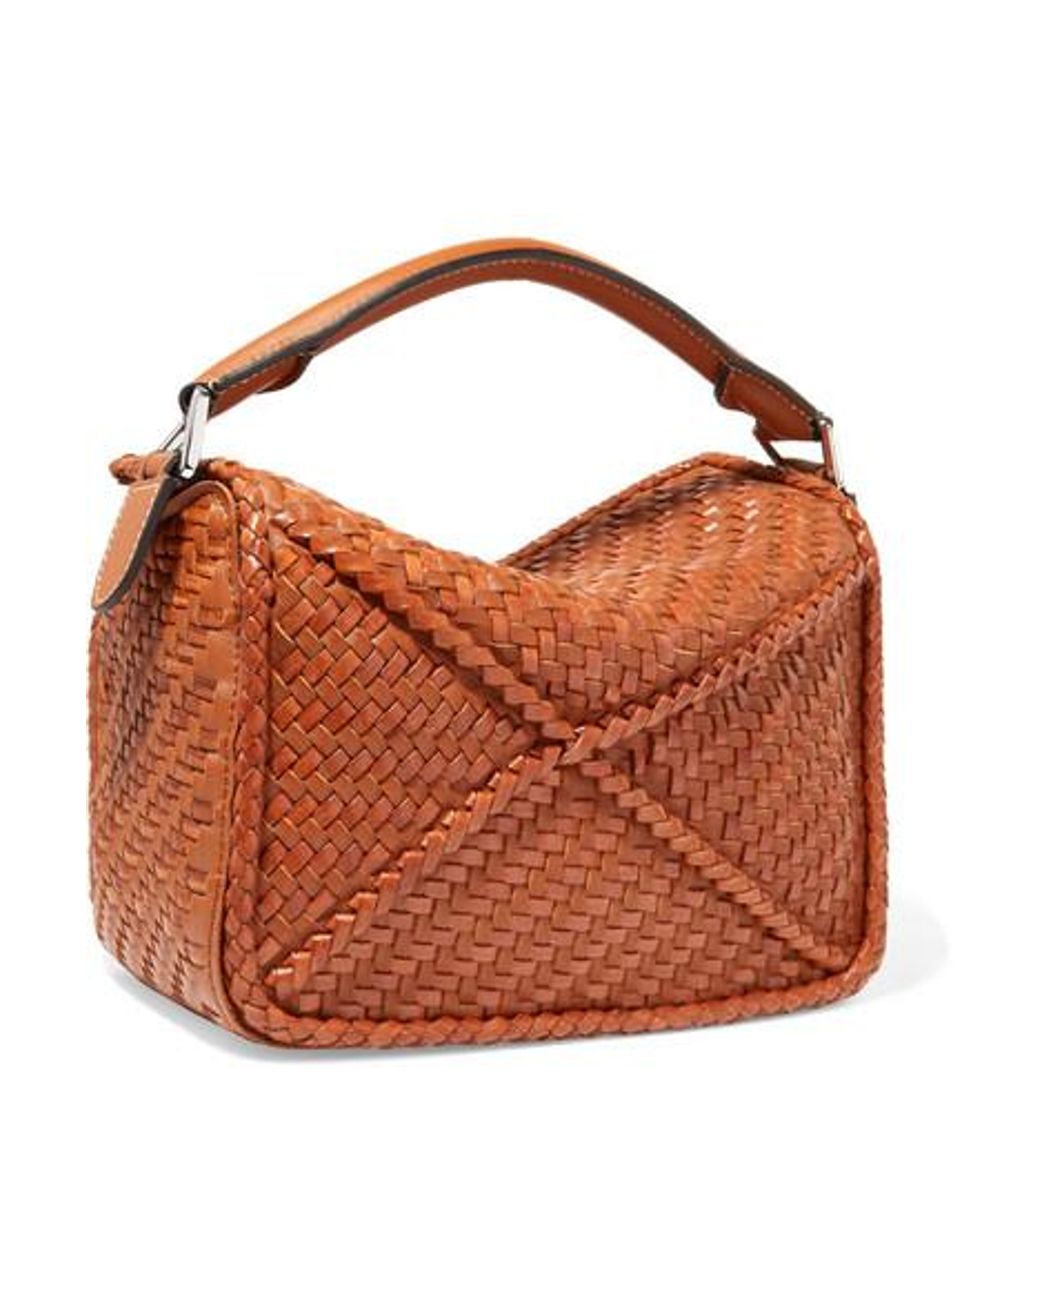 Loewe 2019 S/S Small Woven Puzzle Bag – Recess